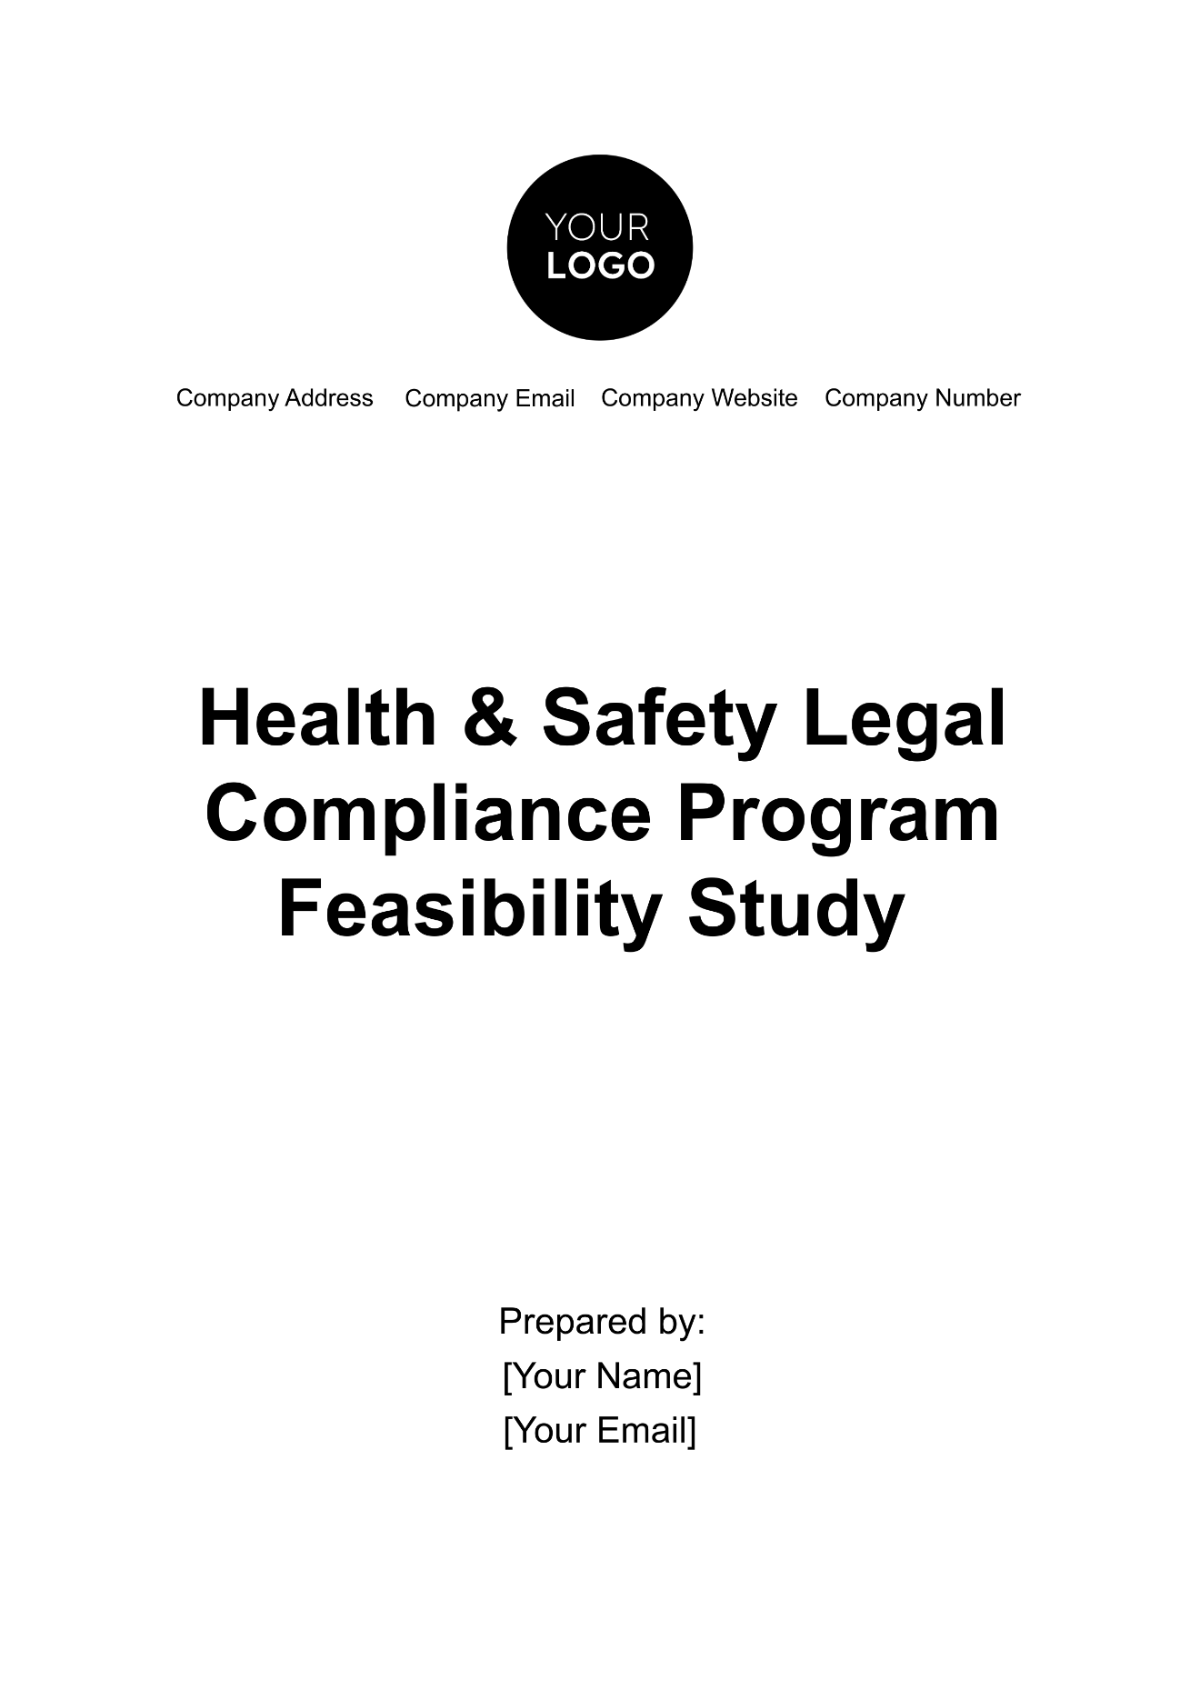 Health & Safety Legal Compliance Program Feasibility Study Template